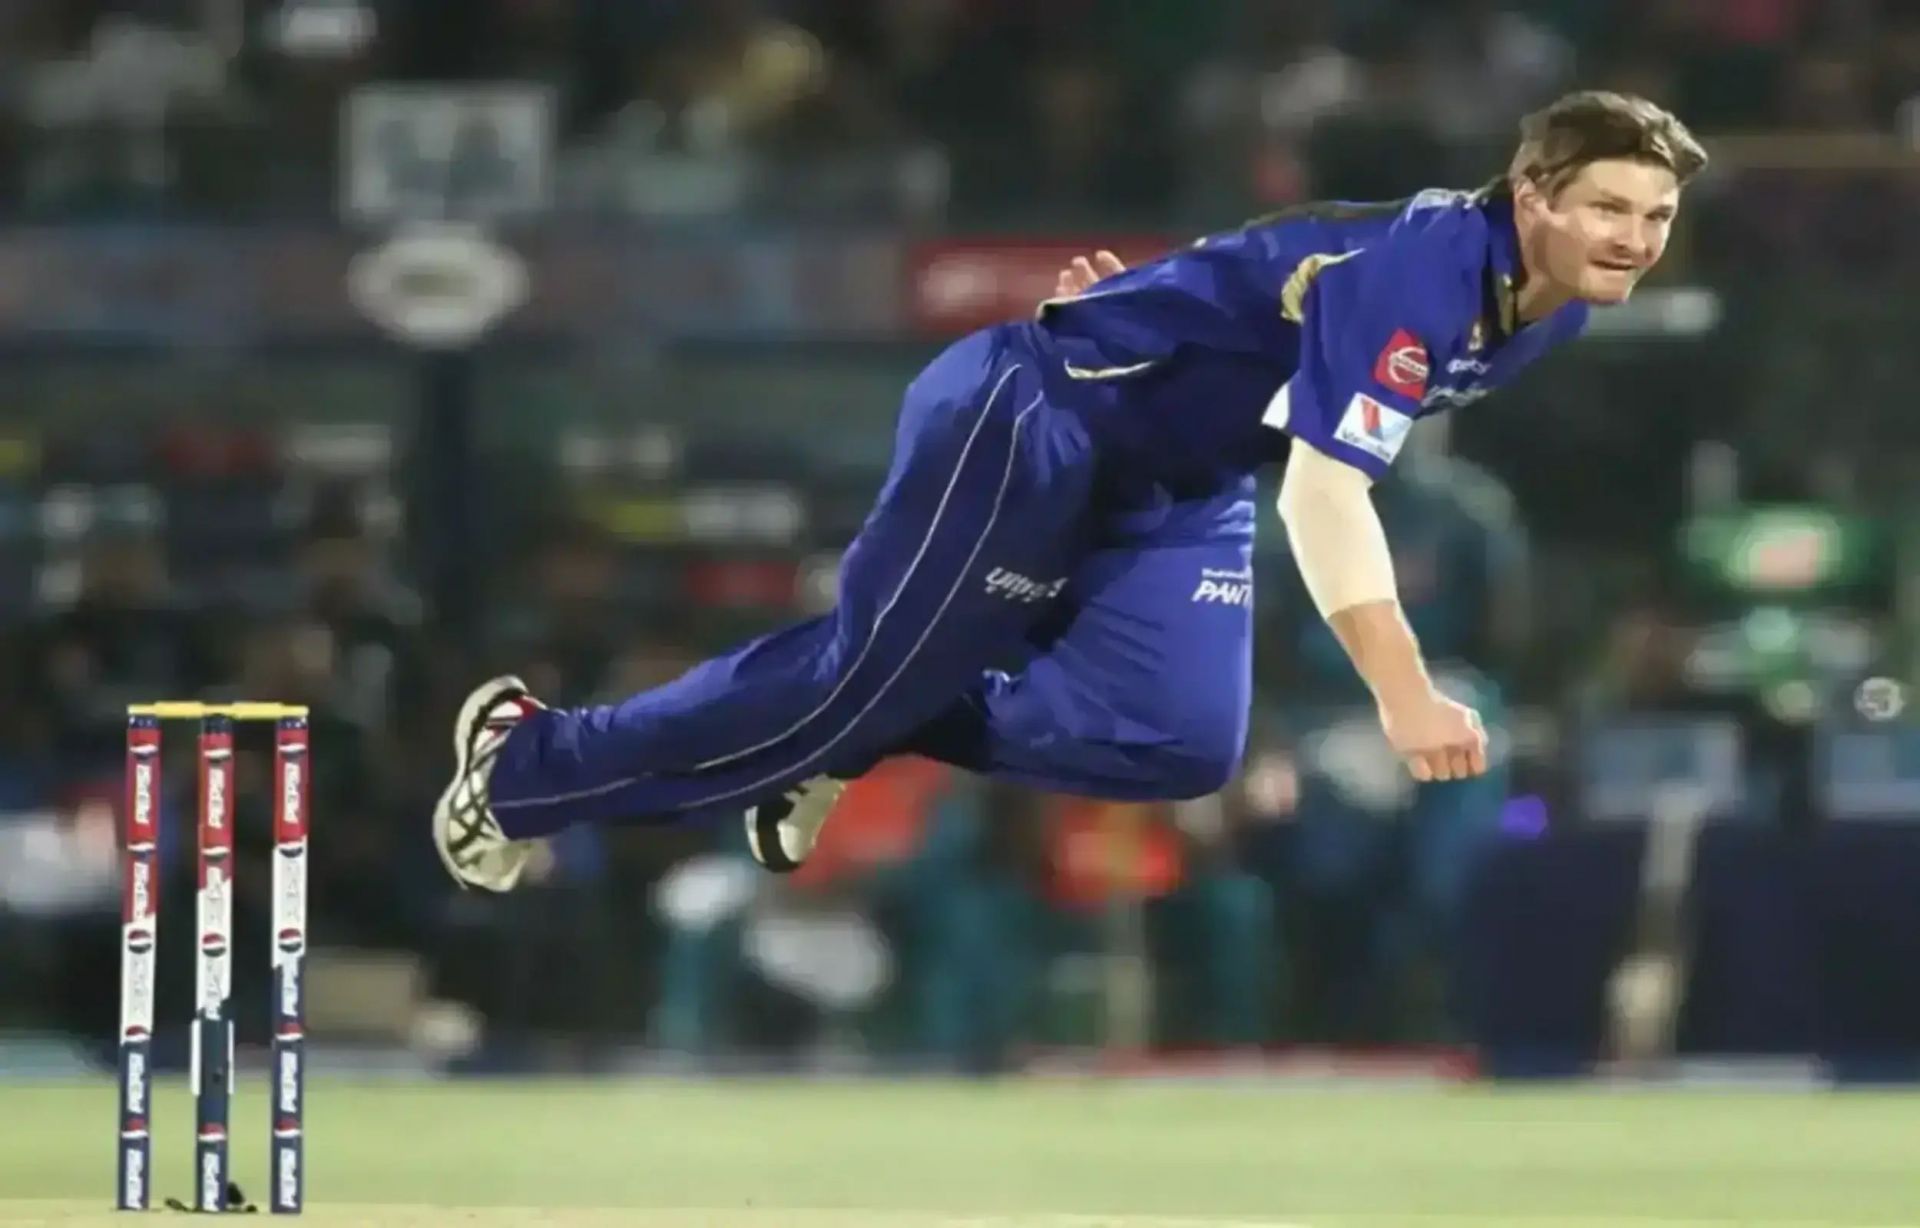 Shane Watson was the Player of the Tournament in IPL 2008 (Image: BCCI/IPL)